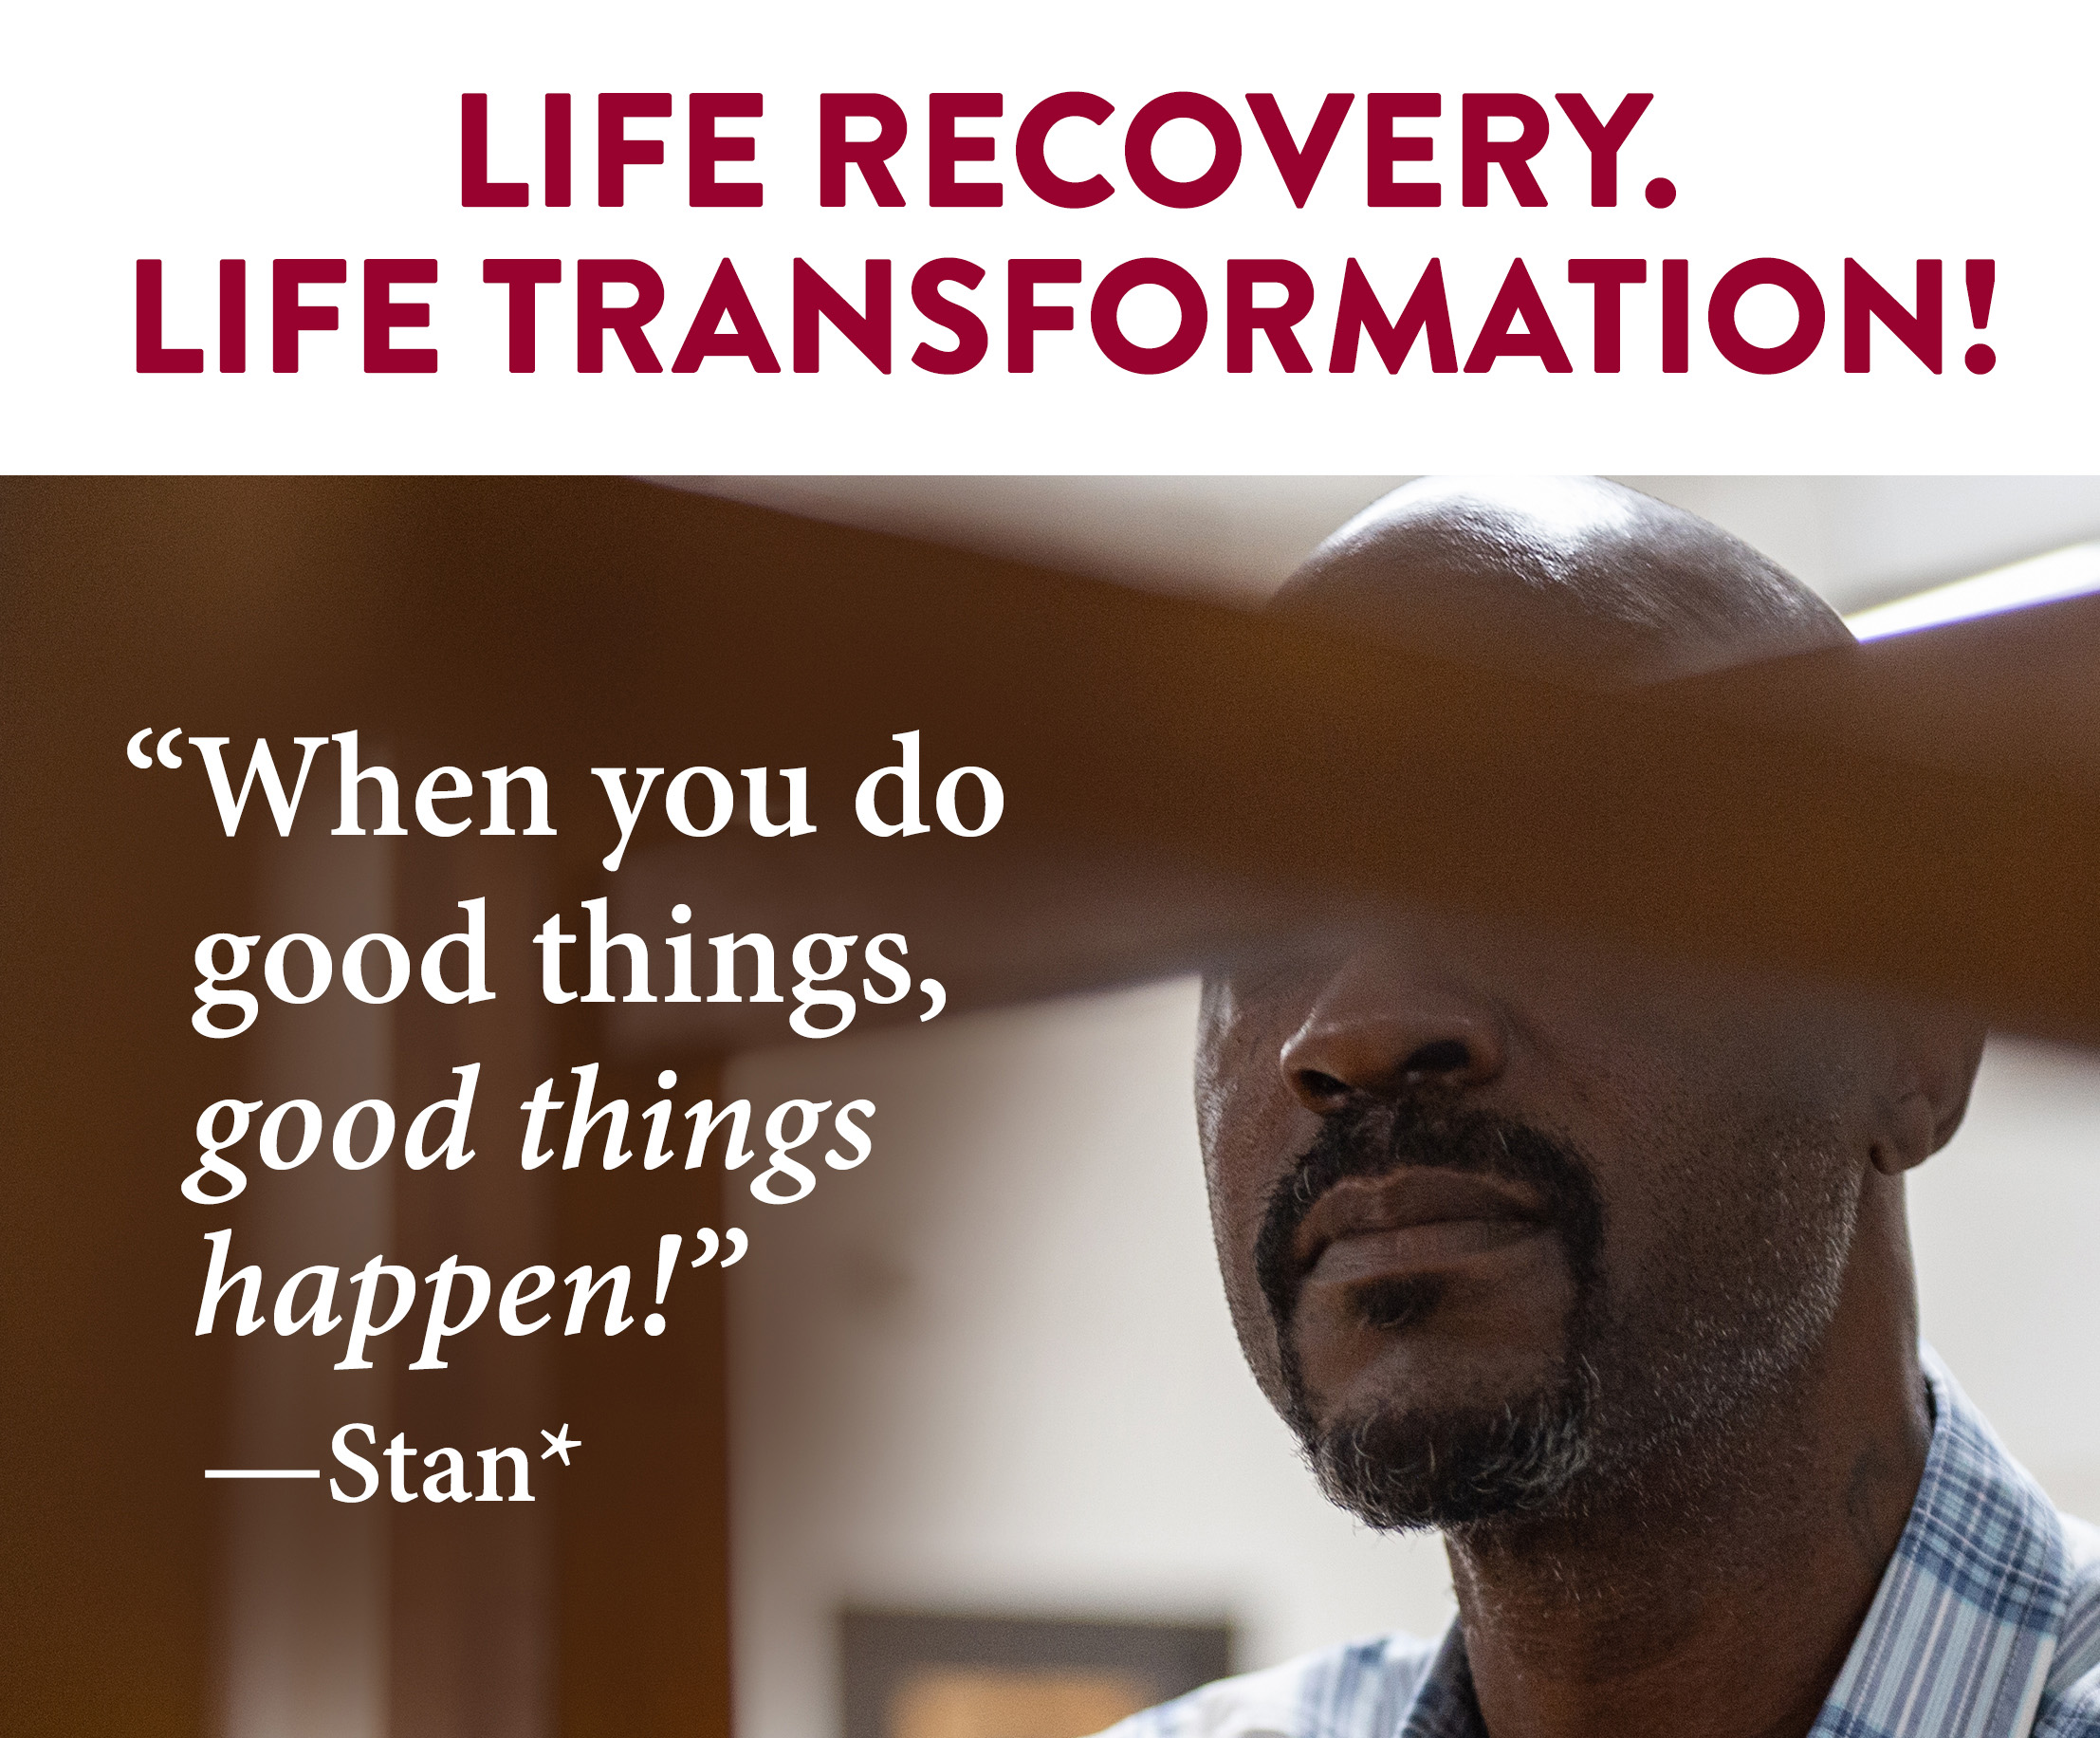 LIFE RECOVERY. LIFE TRANSFORMATION.